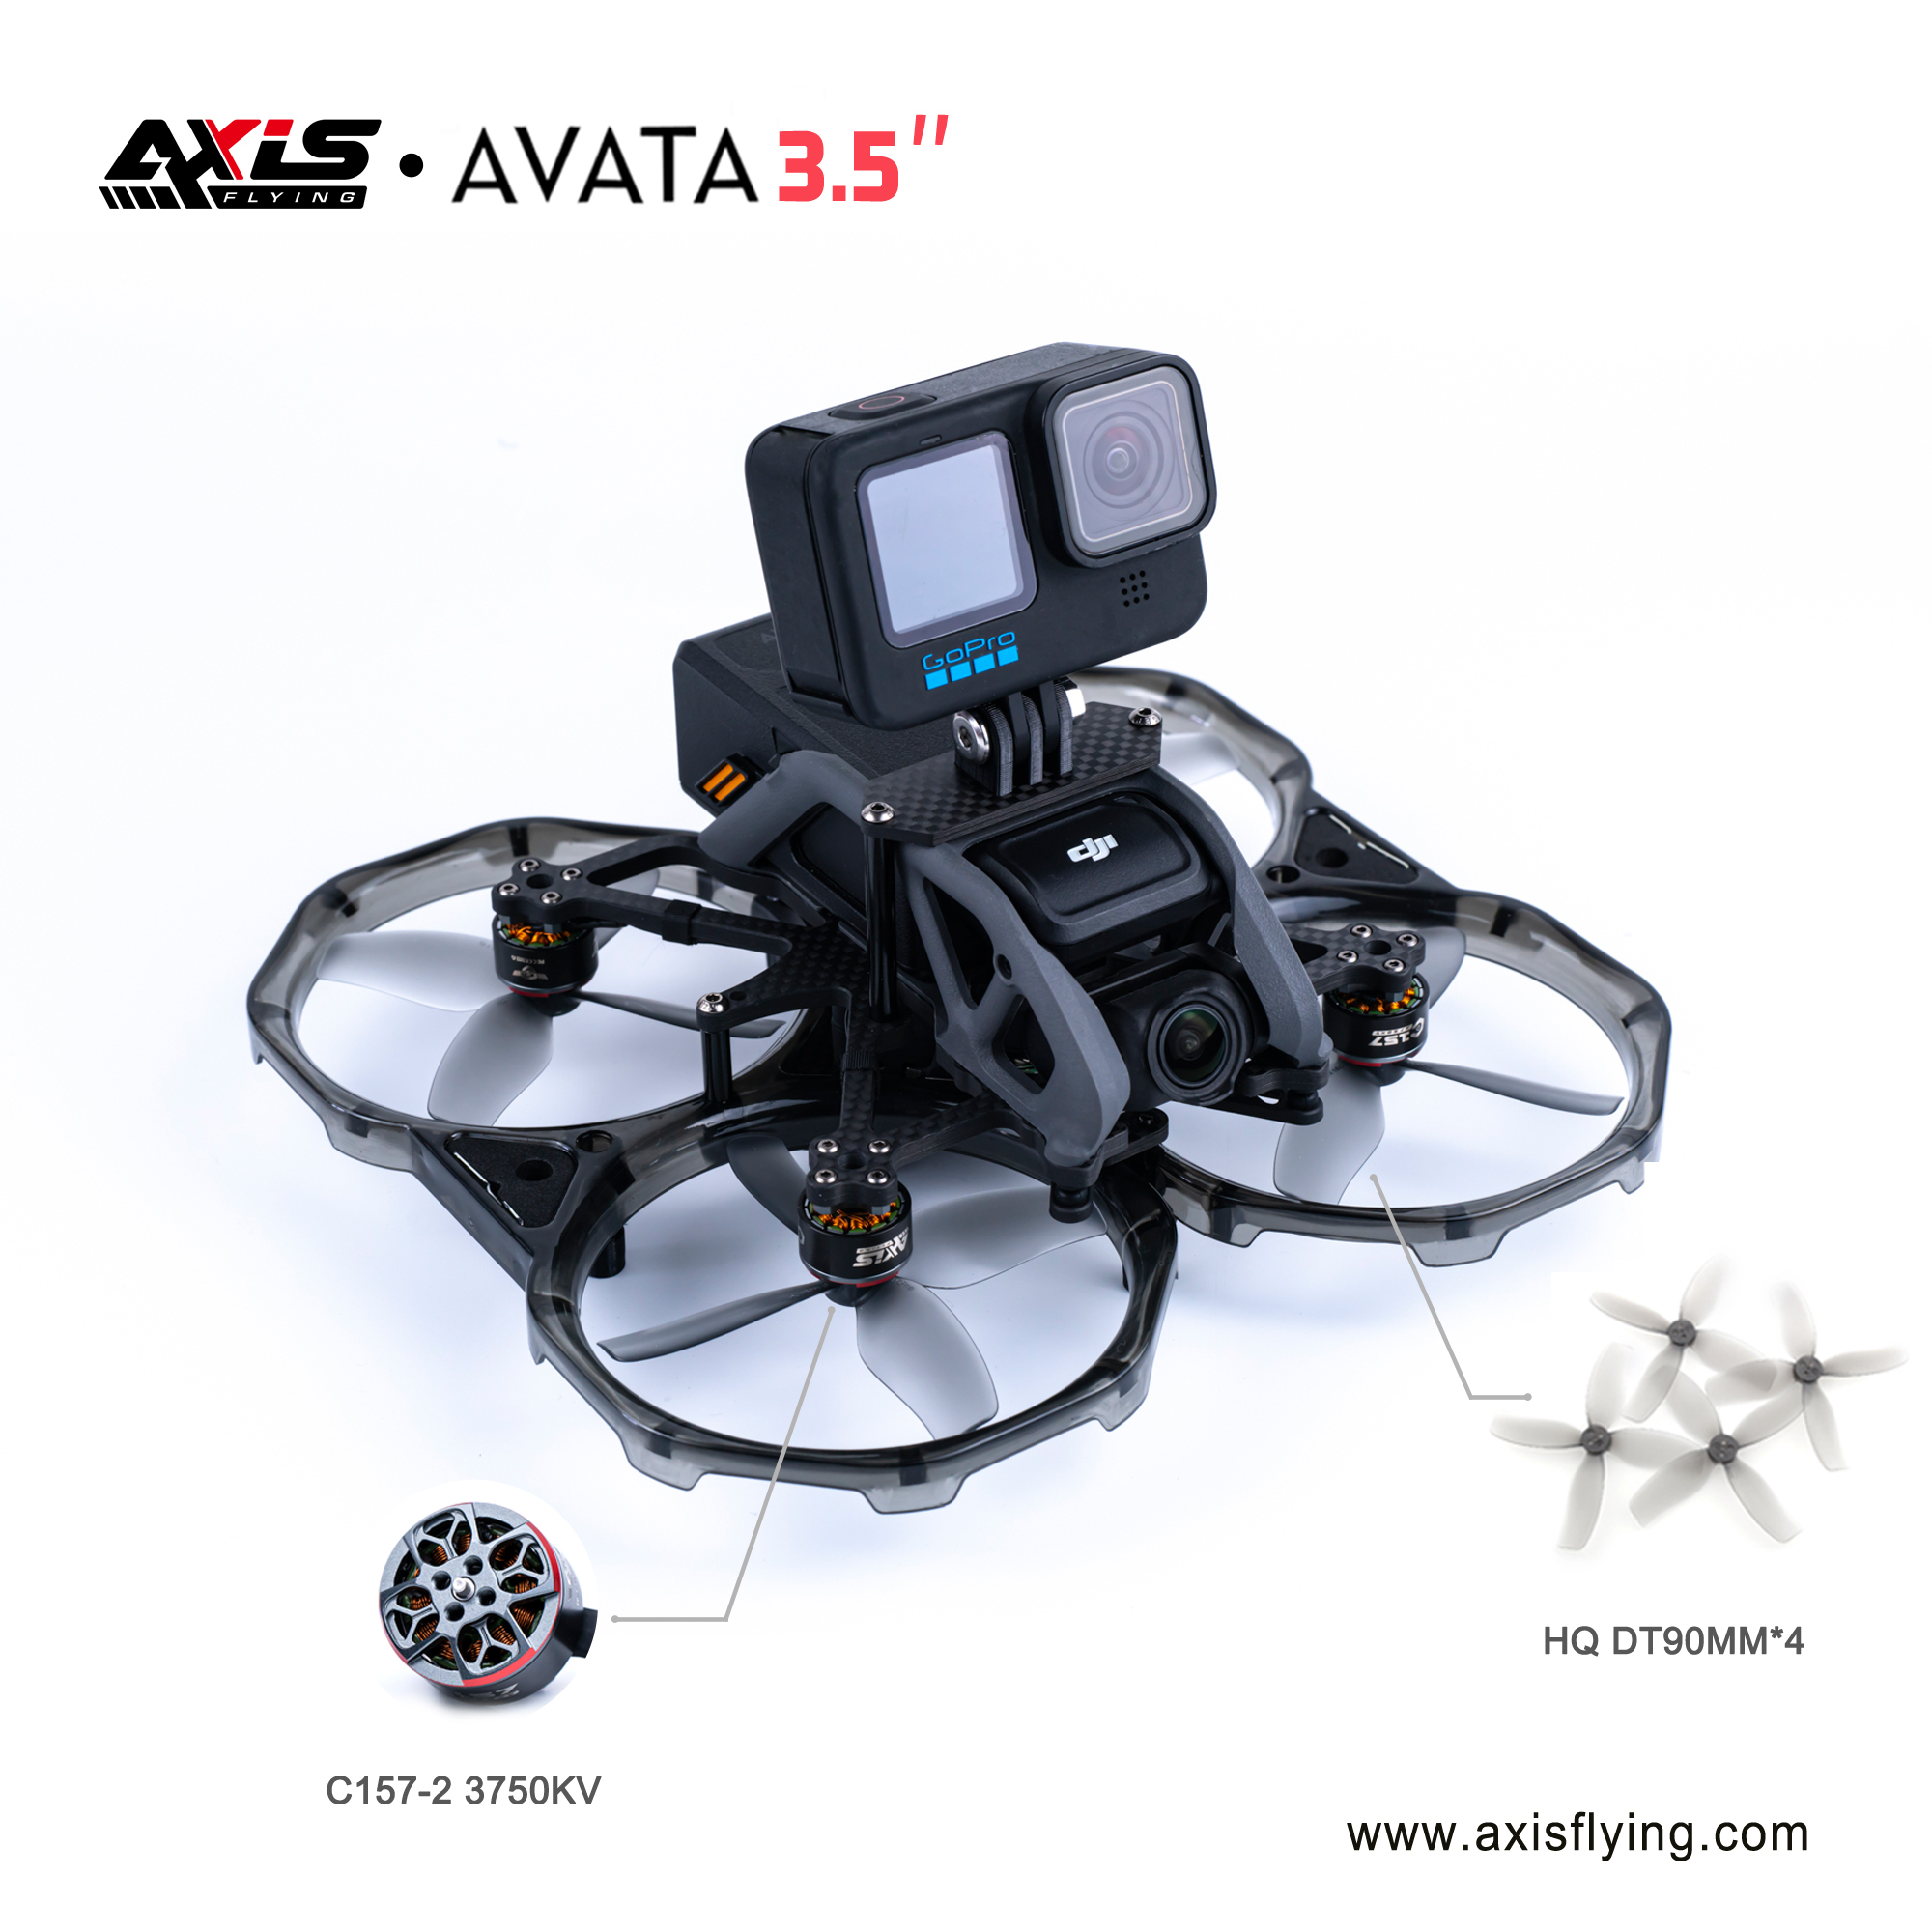 Axisflying HQ Prop DT90MM*3 / DT90MM*4 for AVATA 3.5 upgrade frame kit  Axisflying DT90MM HQ Prop drone propeller for AVATA 3.5 upgrade frame kit  HQ Prop,drone HQ Prop,HQ Prop DT90MM*3 / DT90MM*4 for AVATA 3.5 upgrade frame kit,drone propeller